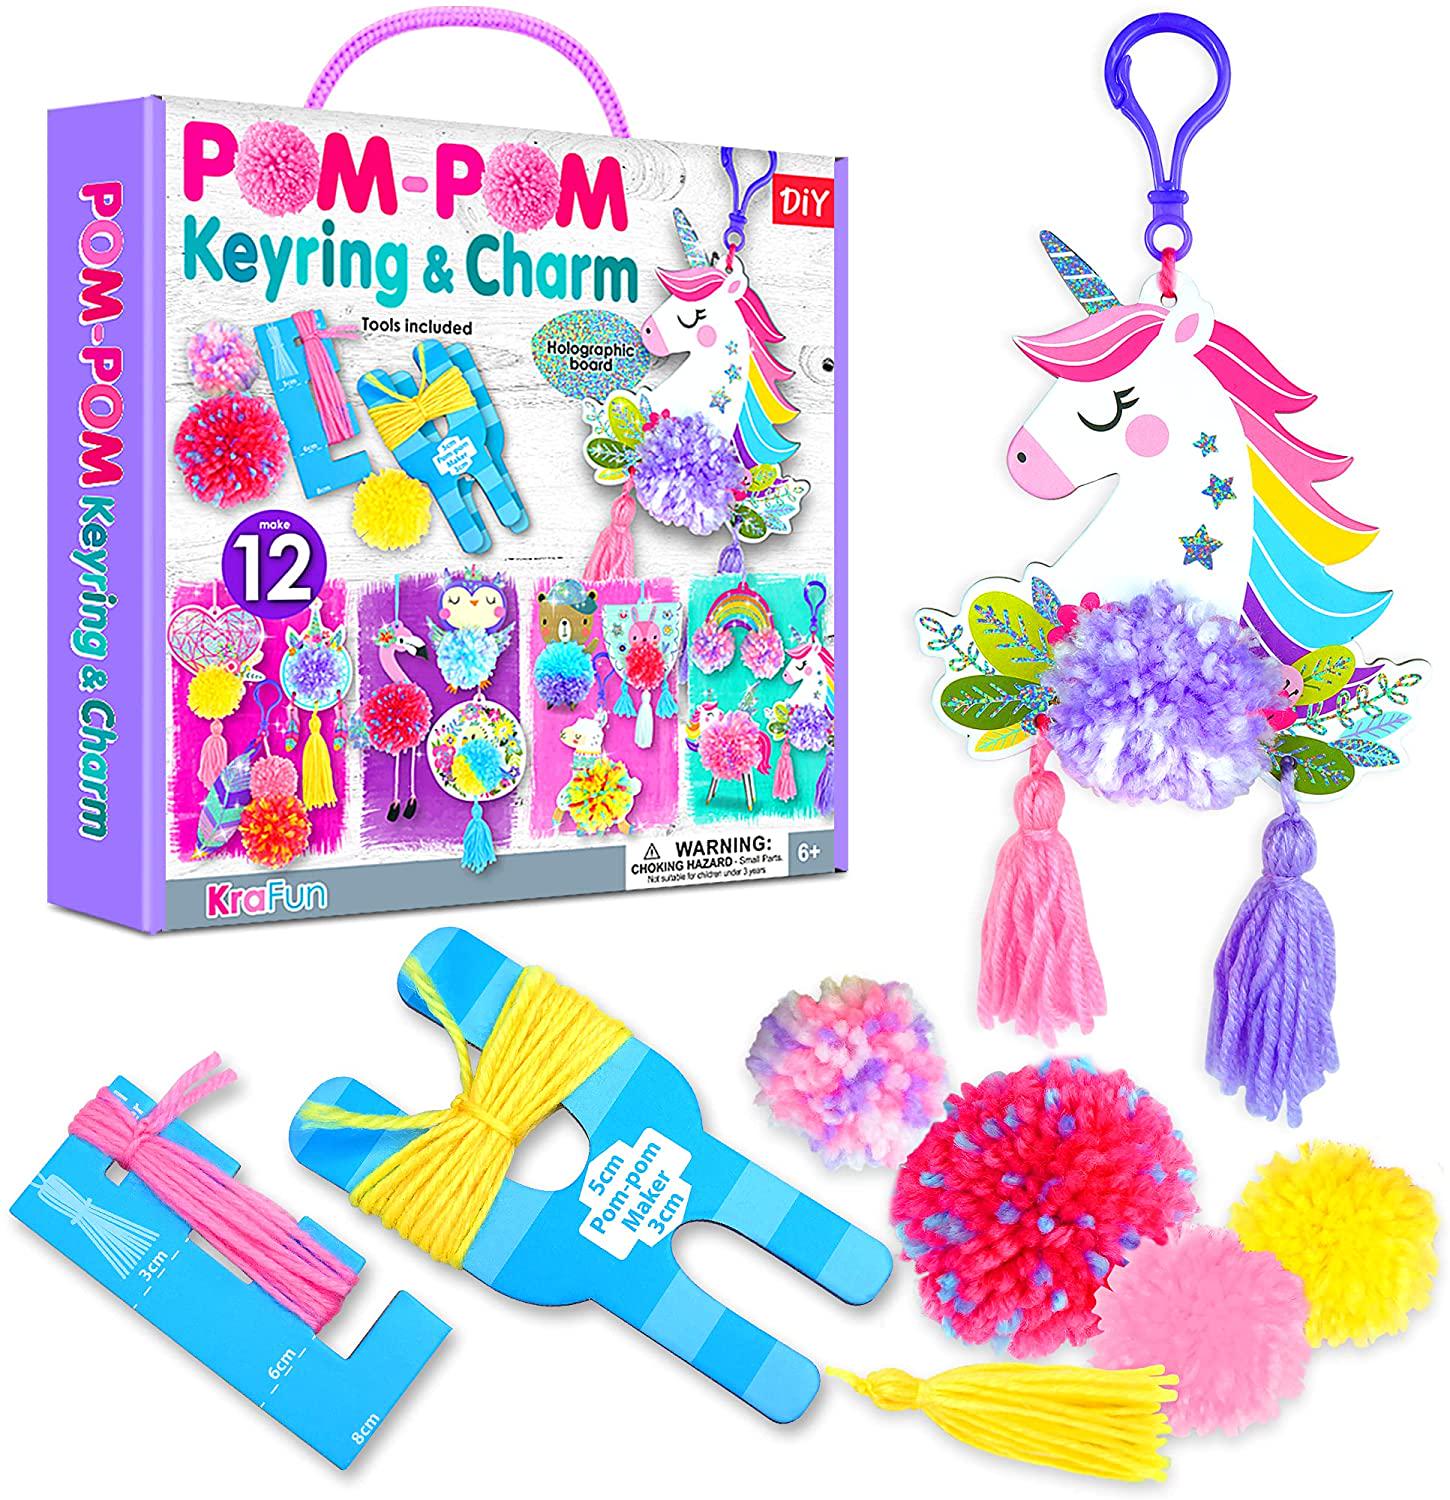 KRAFUN, KRAFUN Unicorn Pom Pom Character Animal Arts and Crafts Kit, Includes 12 Mini Pom Pets Keyrings and Charms, Instructions, Tools and Materials, Beginner Plush Project for Boys and Girls